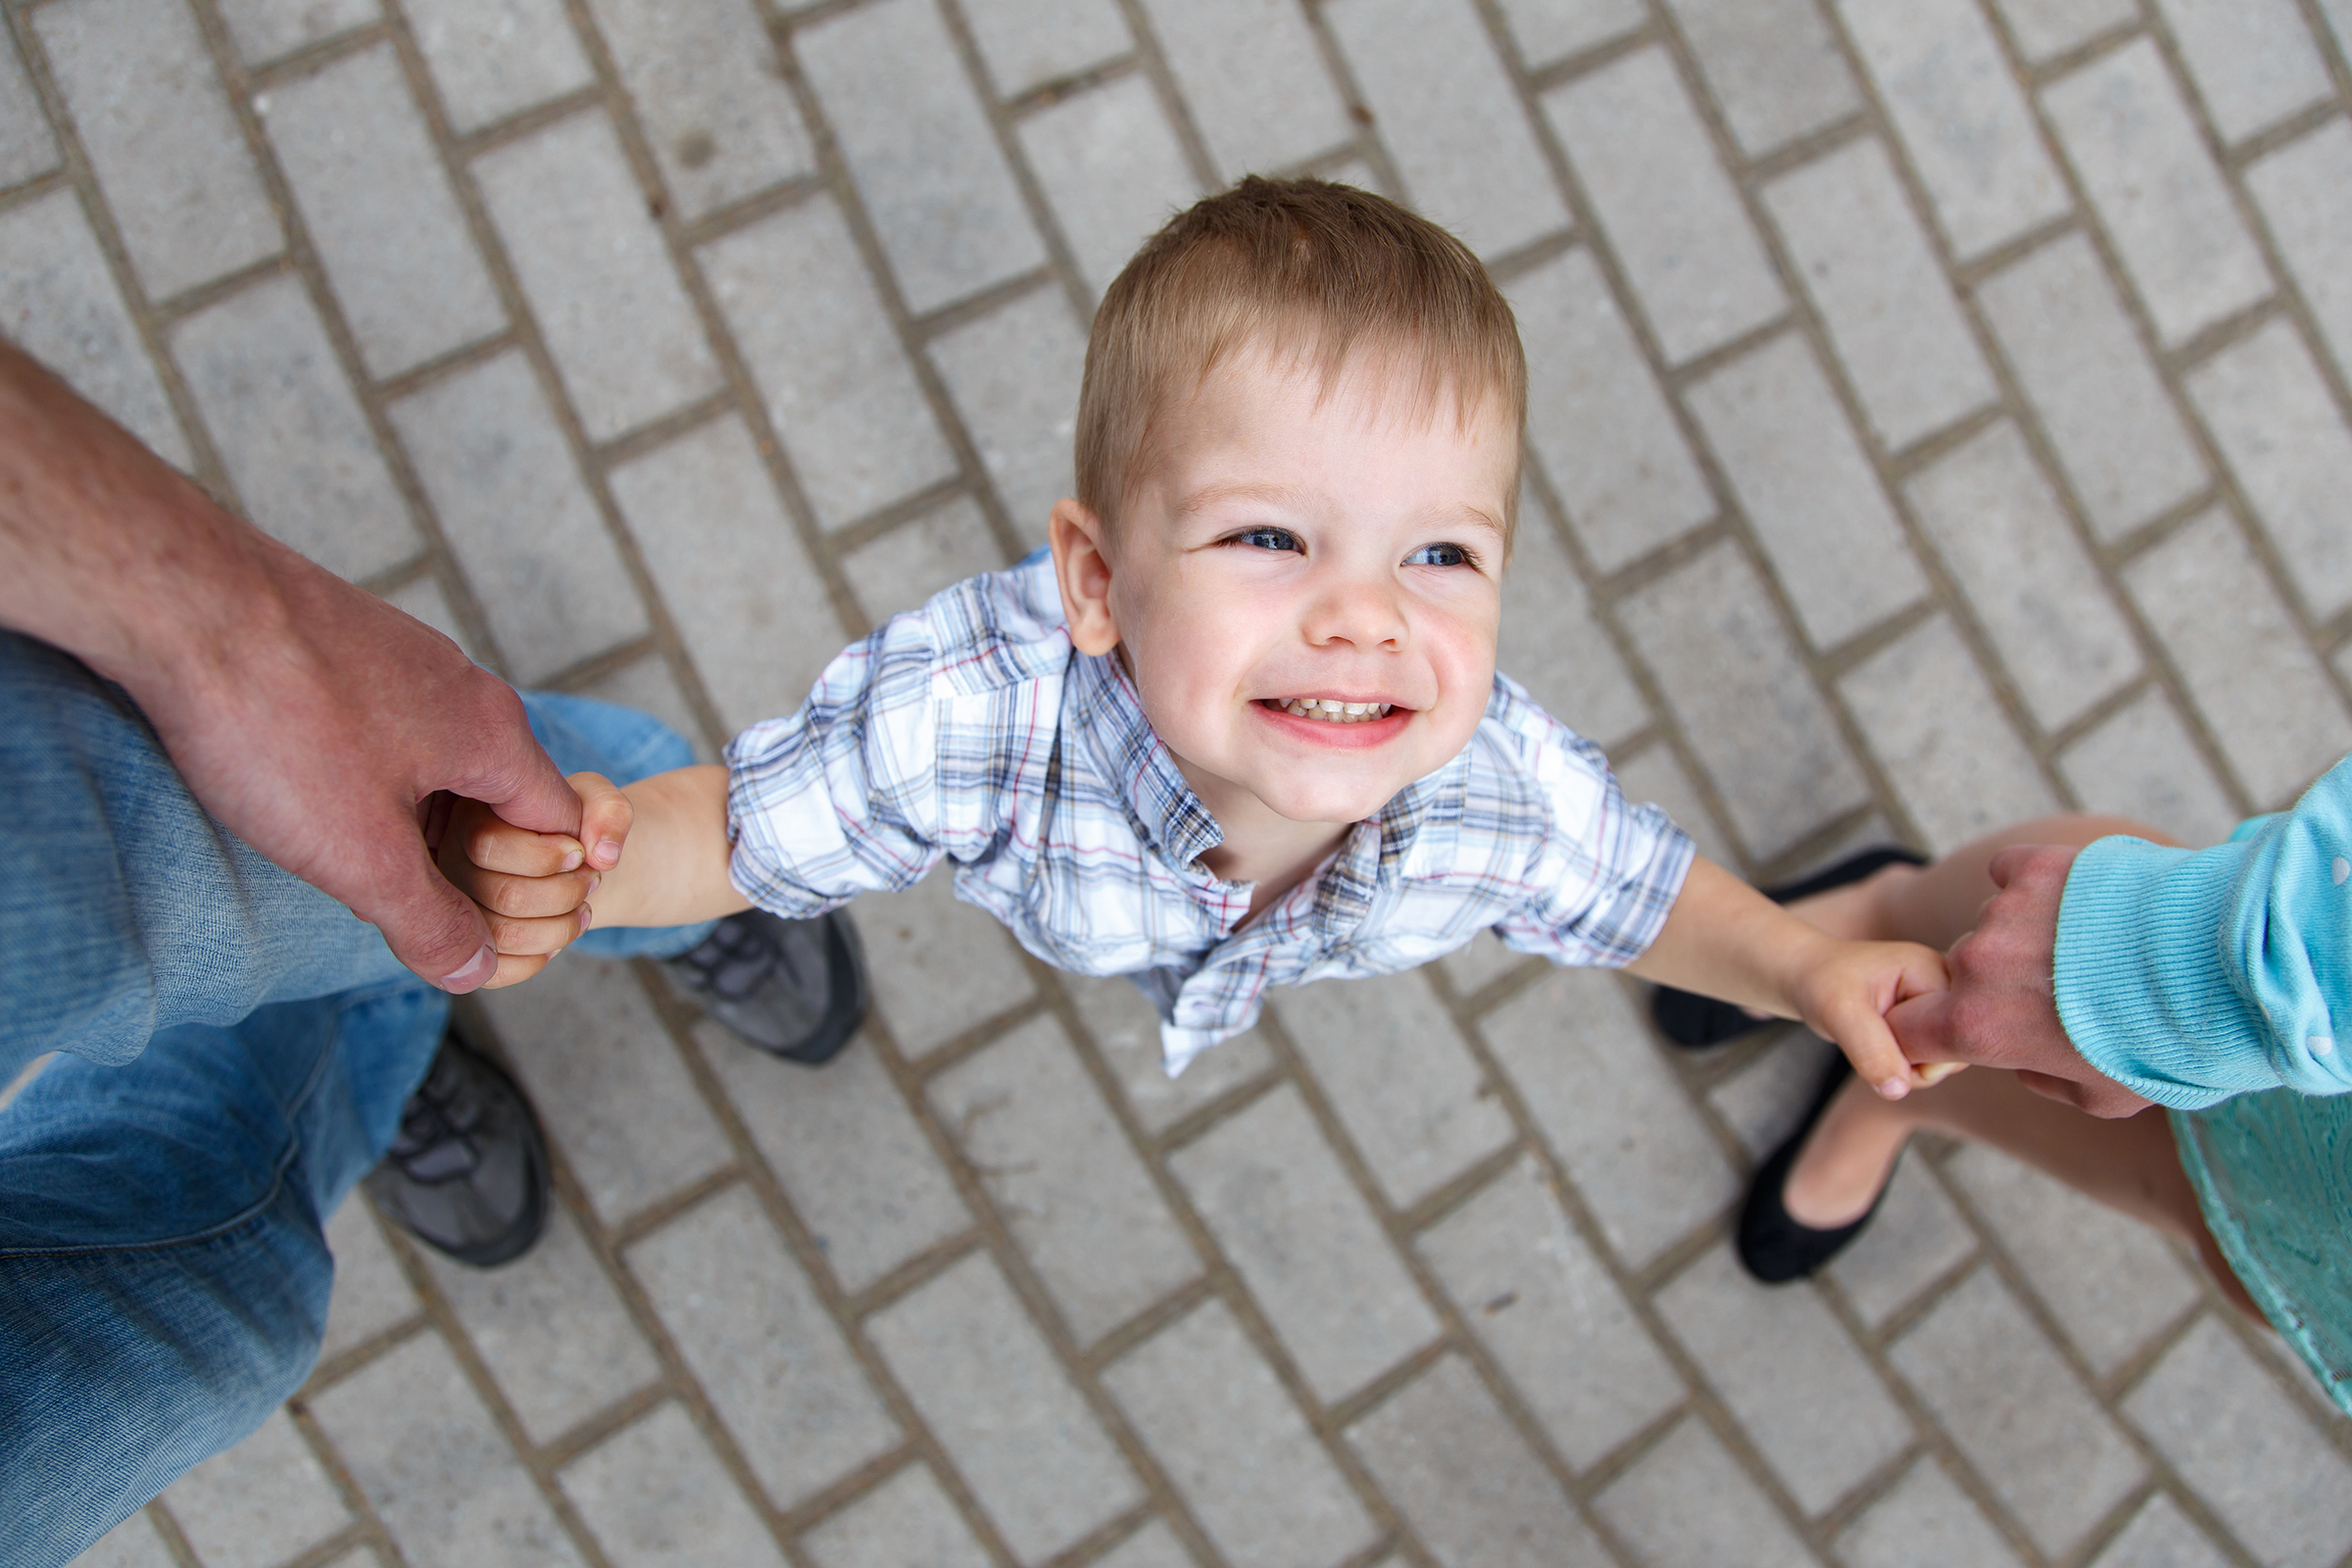 WEB-TODDLER-TWO-YEAR-OLD-BOY-LOOK-UP-SMILE-Vanoa2-Shutterstock_294313784